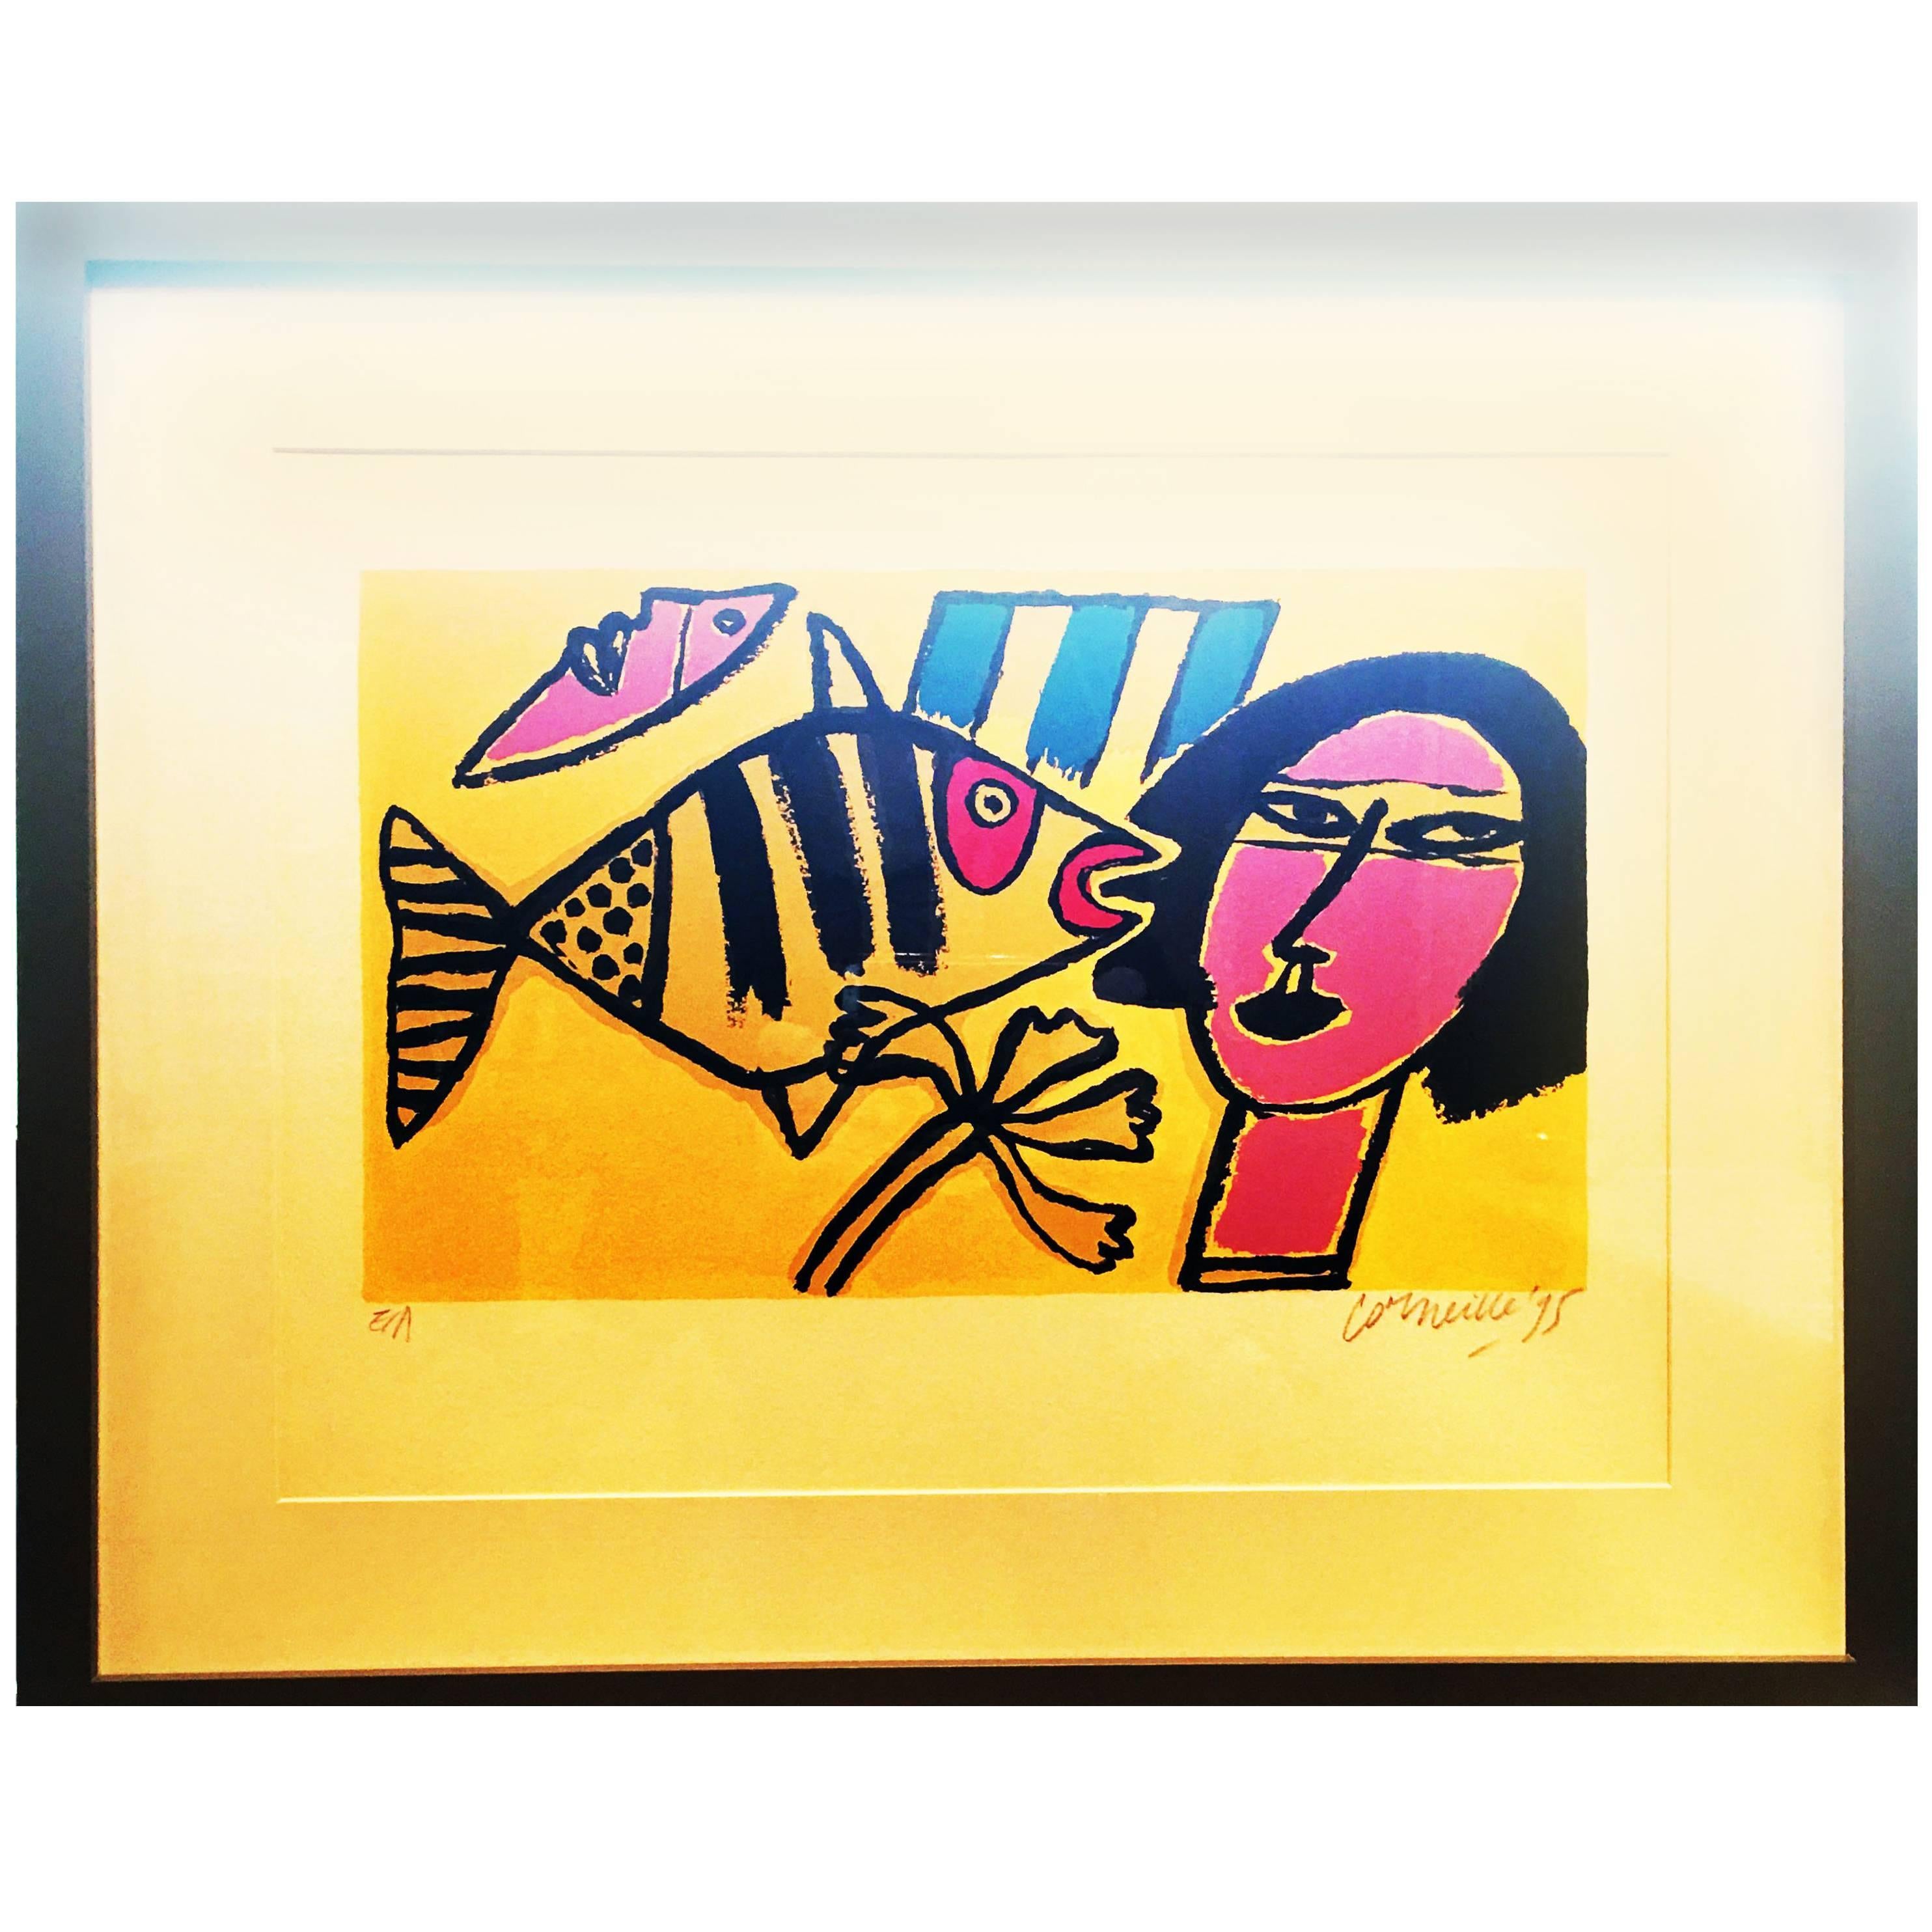 Original Signed, Numbered and Dated Silkscreen Print by Corneille